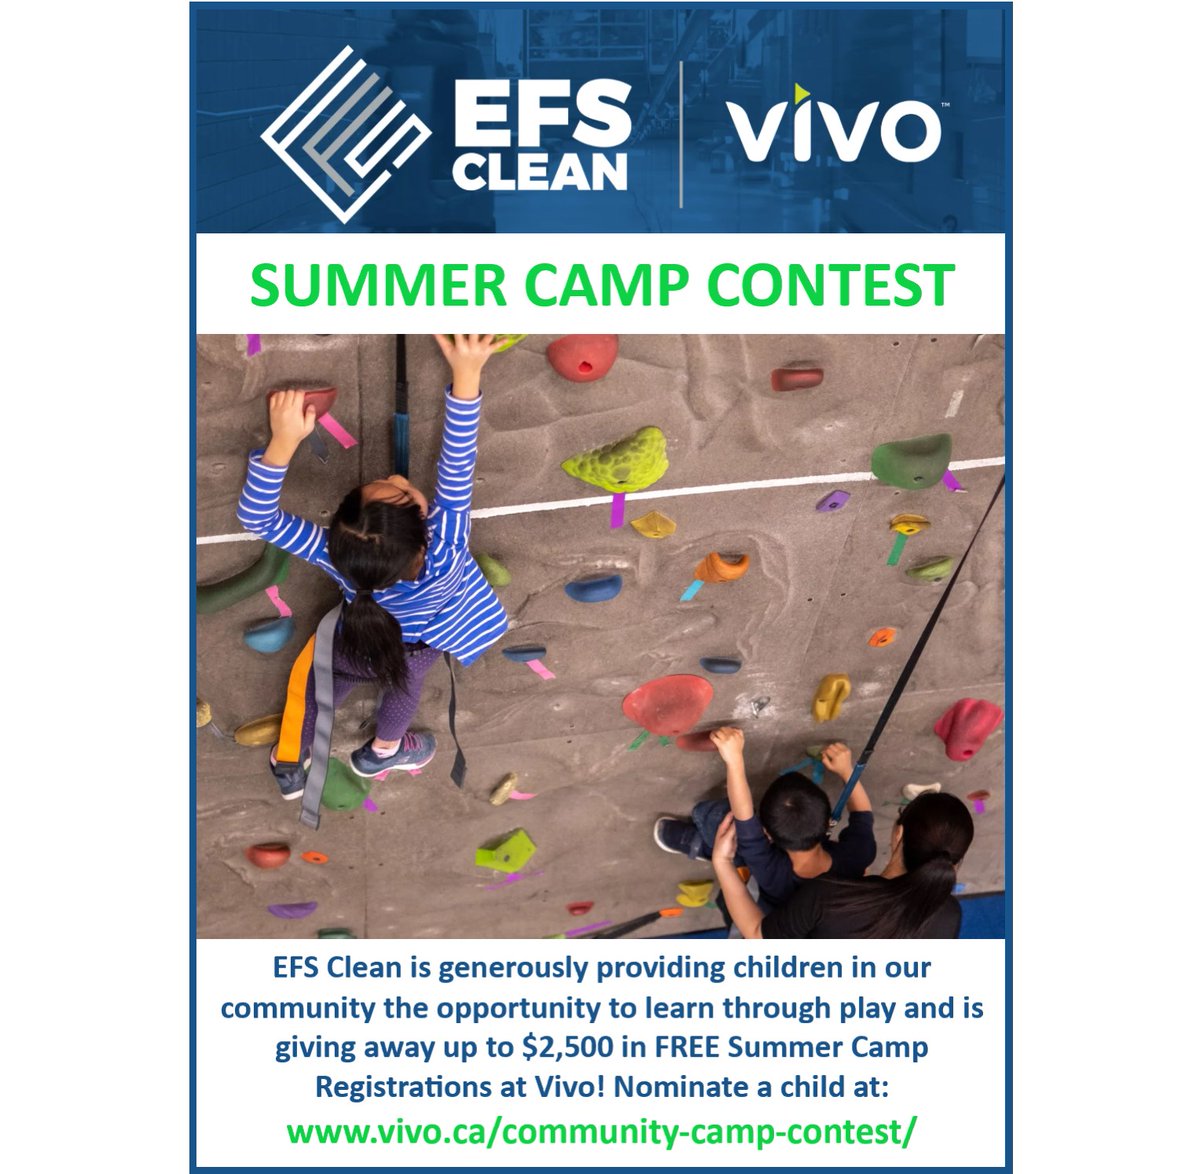 Nominate a child for a chance to win a FREE summer camp! #calgary #community #cleaningservices